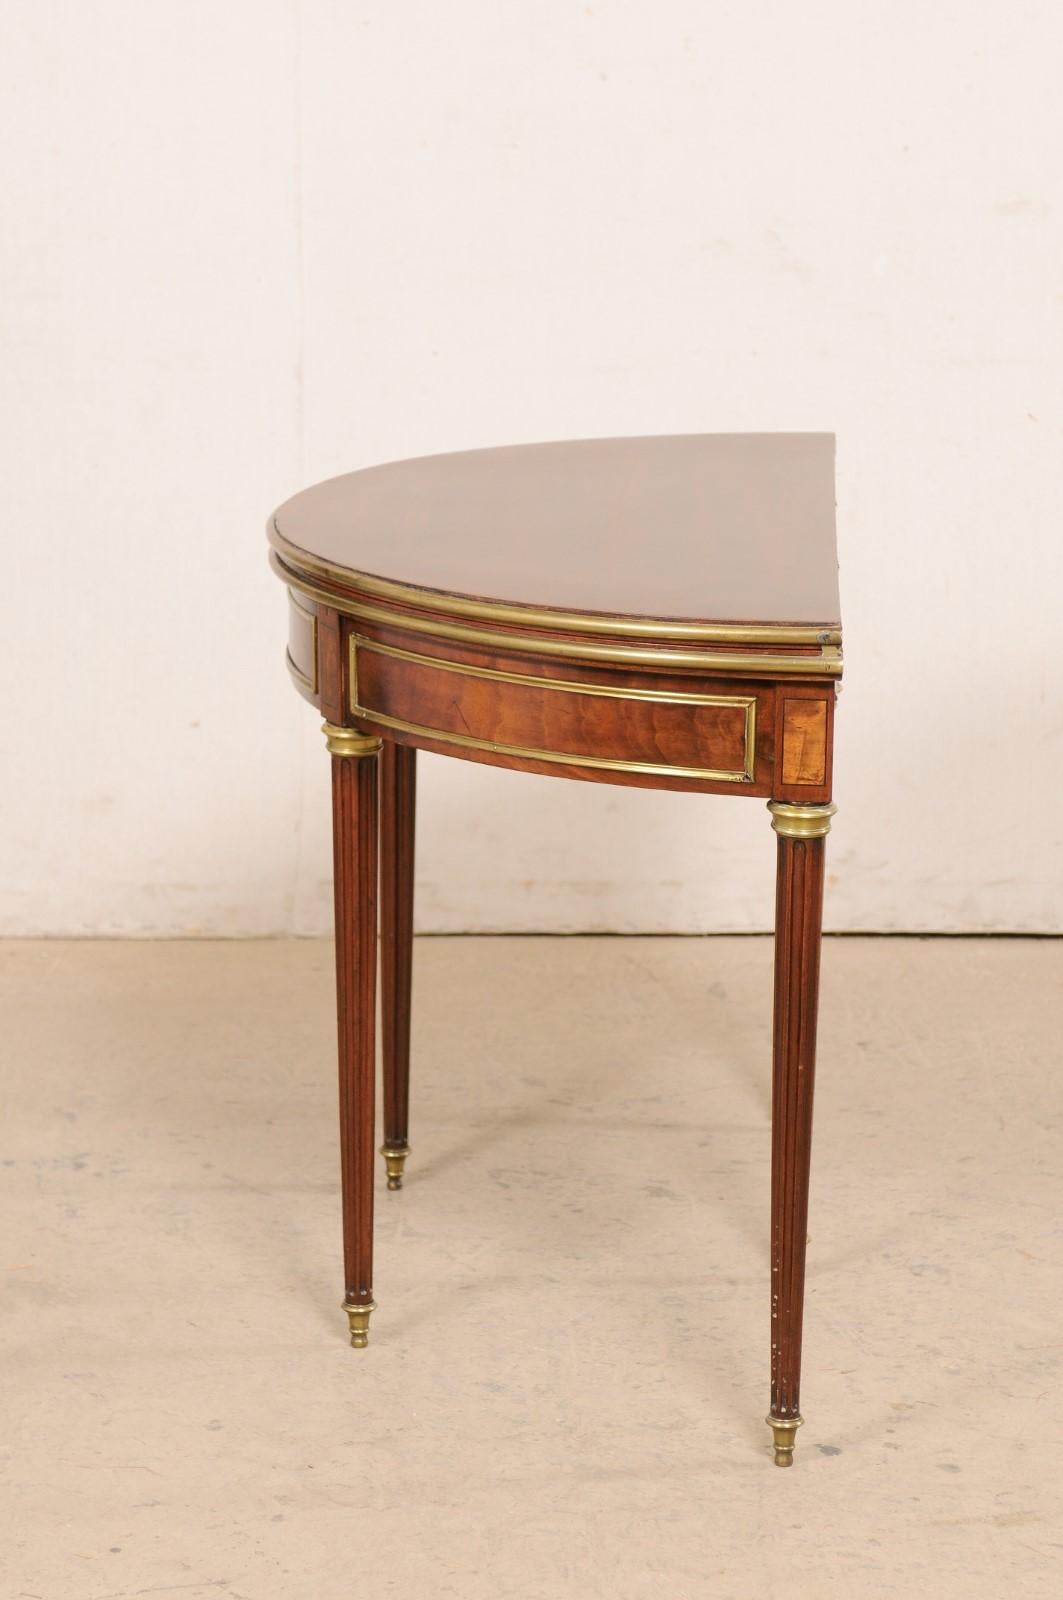  Elegant French Neoclassical Demi-to-round Table W/ Brass Accents, 19th C.  For Sale 9